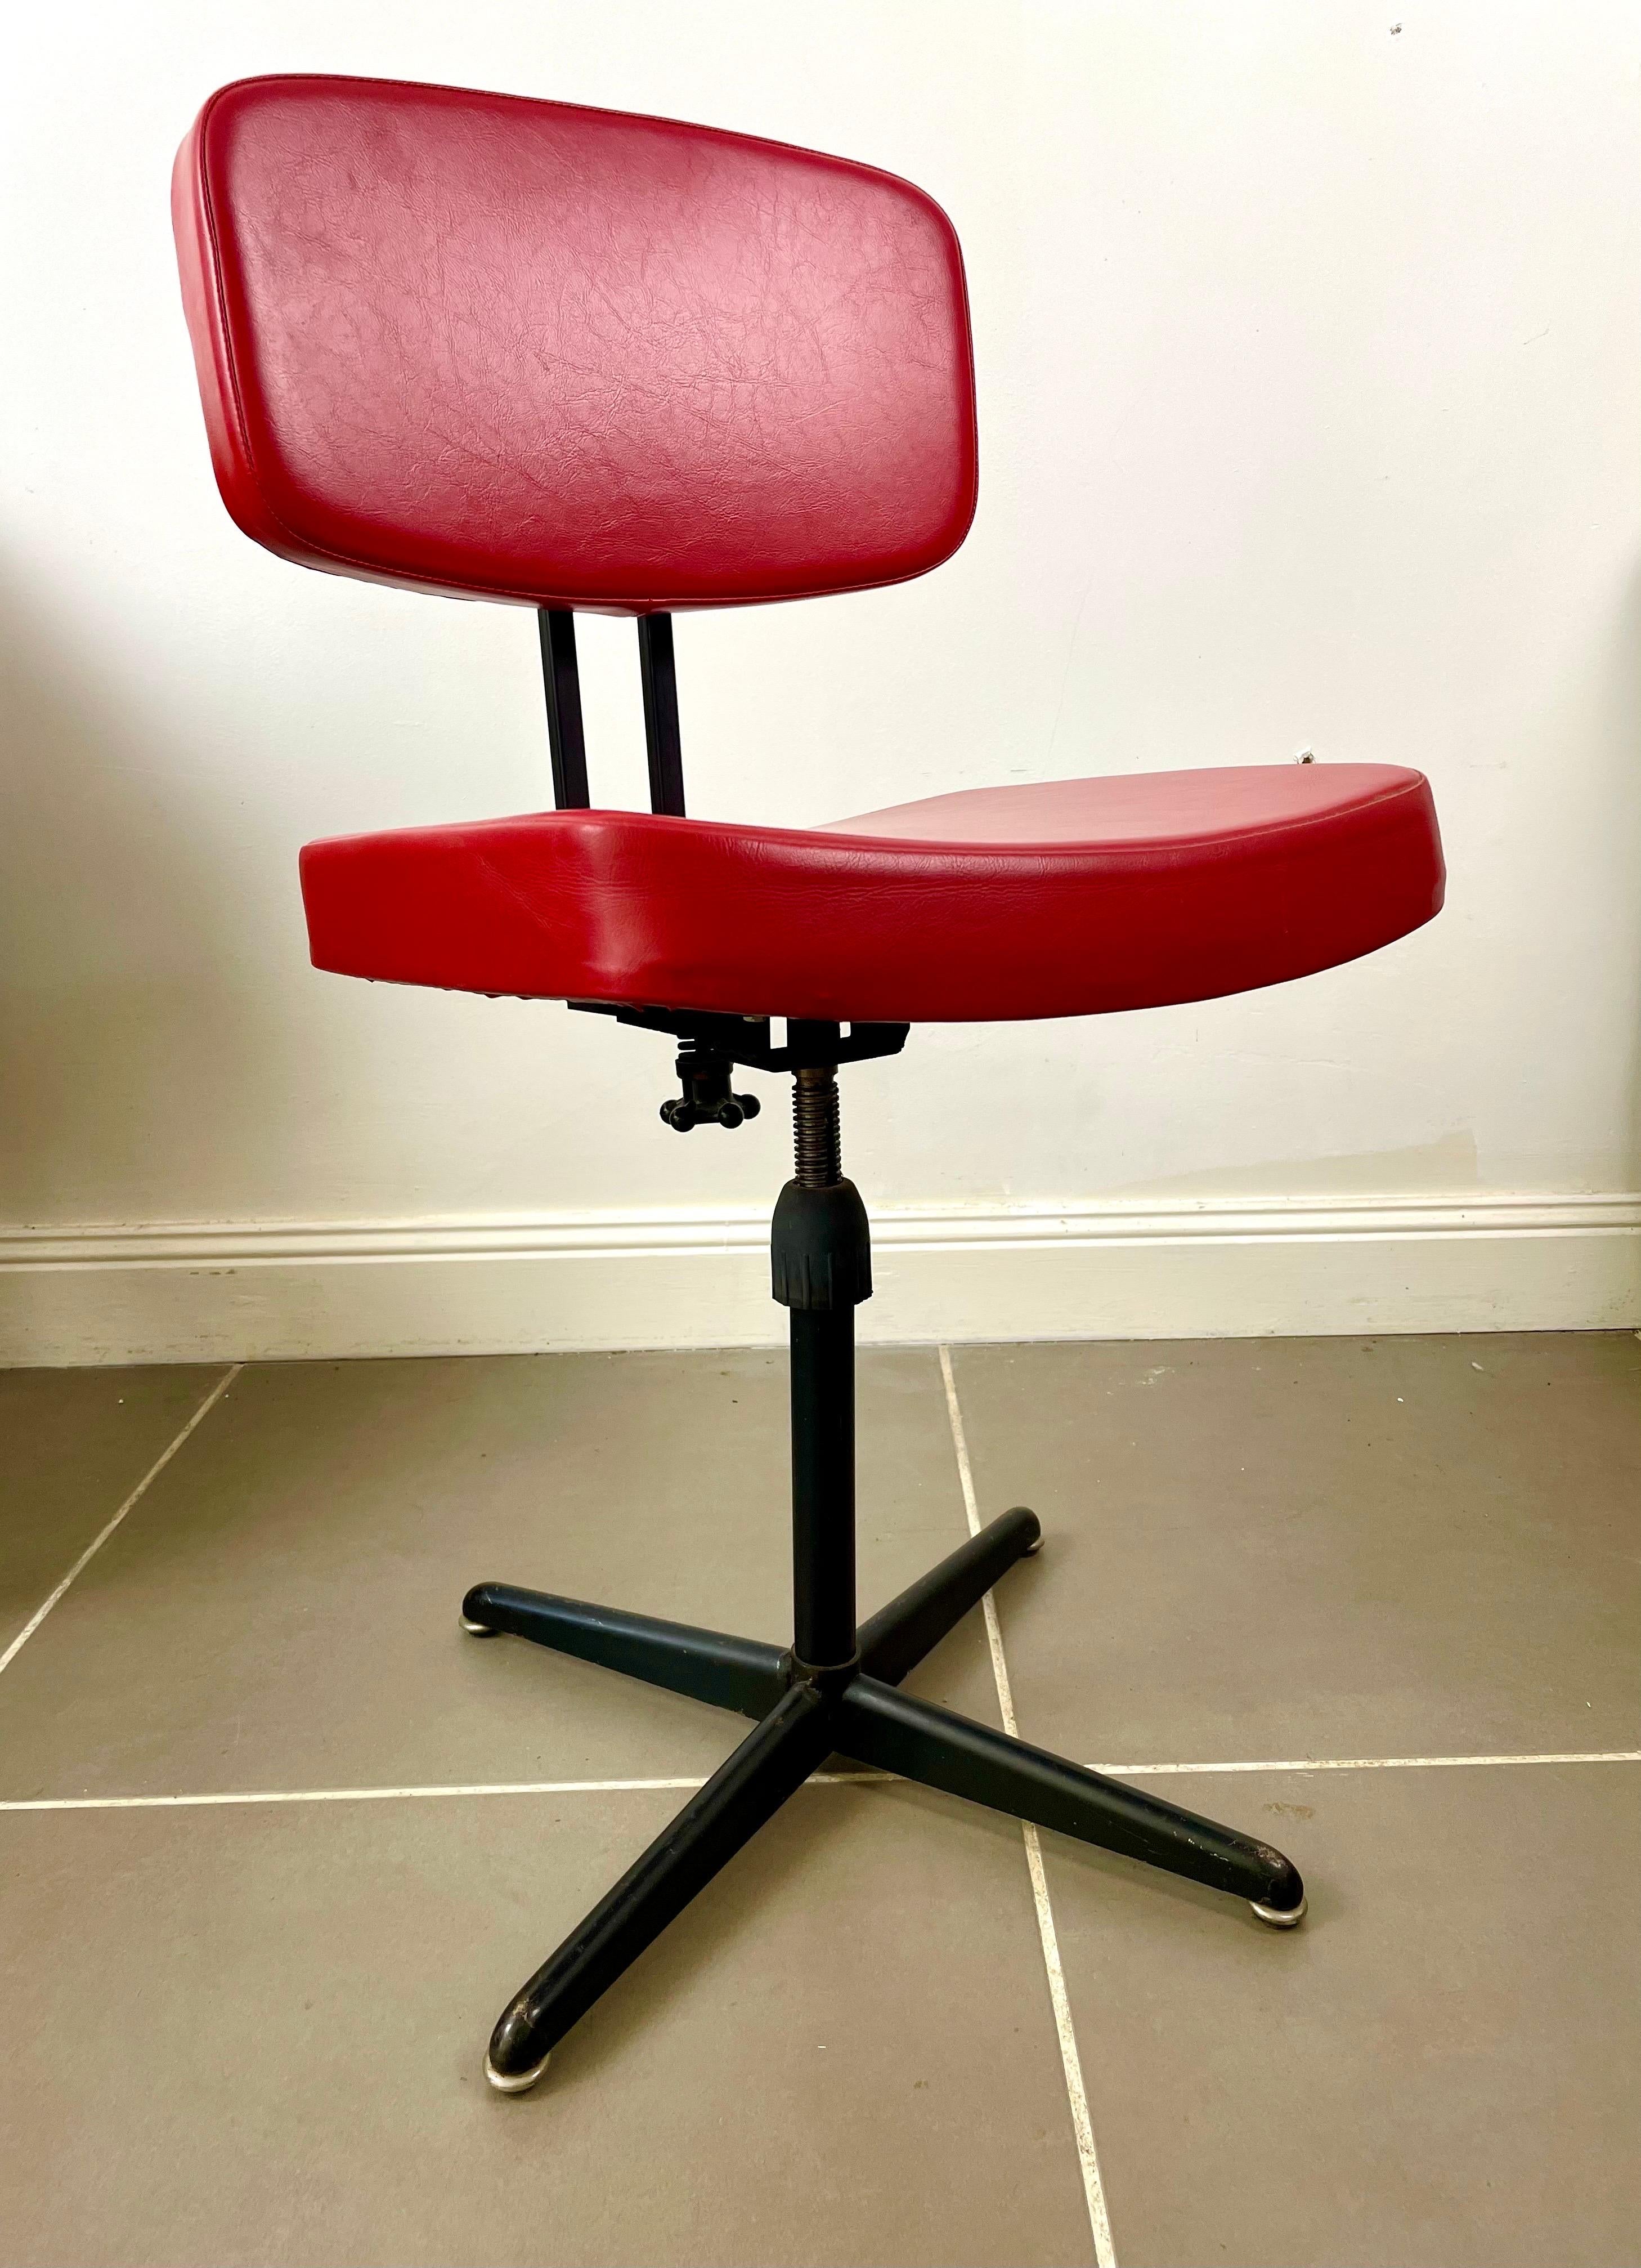 Red and Black Office Chair, 1950s / 1960s
Height-adjustable workshop chair.
No wheels.
Vintage
Retro swivel armchair 1950/1960
Seat and backrest in imitation leather / red leatherette / vinyl.
Base / legs in black metal iron
Comfortable, ergonomic